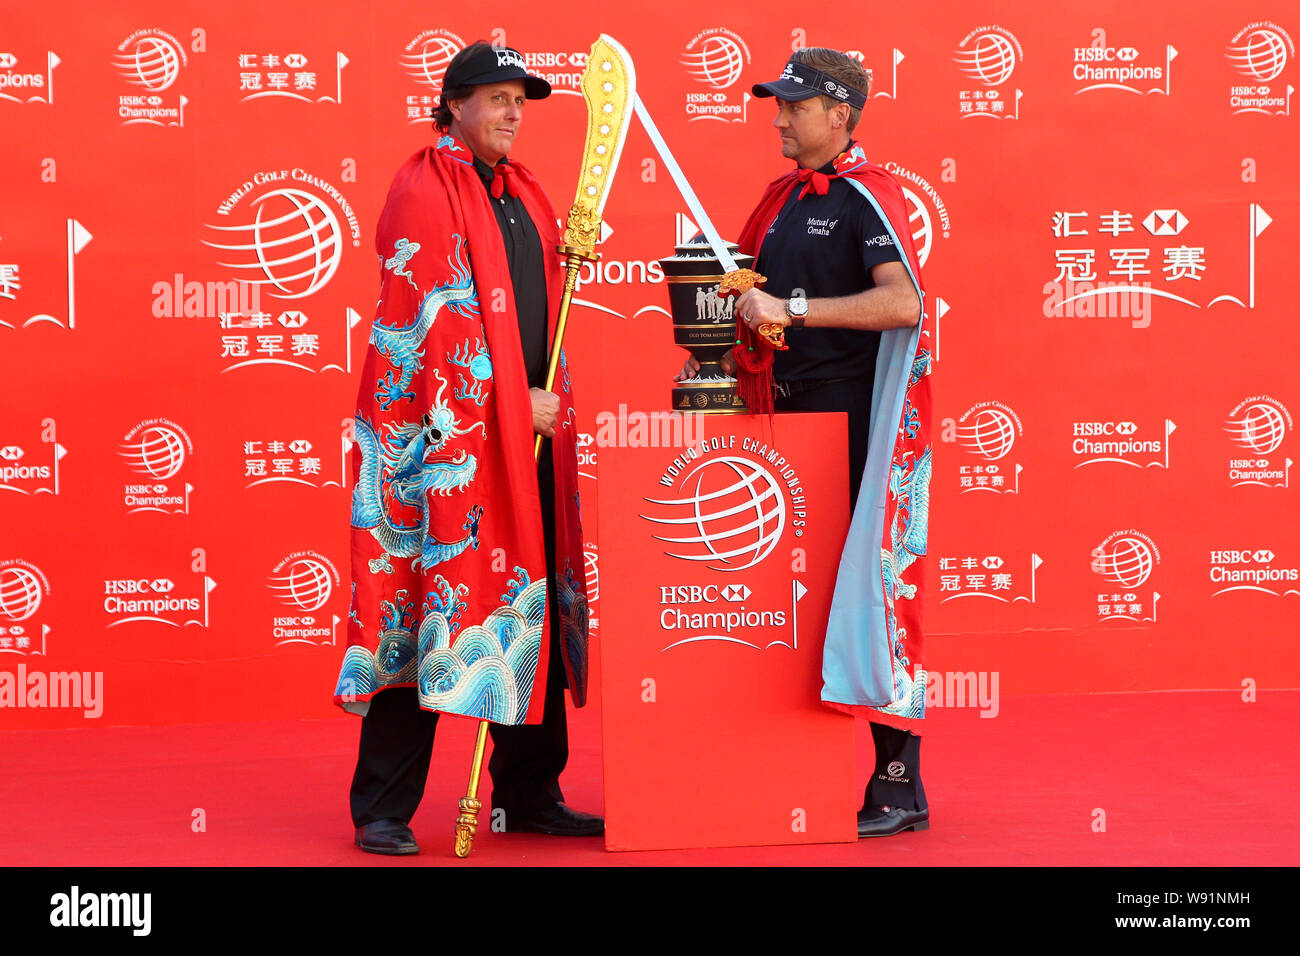 American golfer Phil Mickelson, left, poses with English golfer Ian Poulter during the opening ceremony for the WGC-HSBC Golf Champions 2013 in Shangh Stock Photo